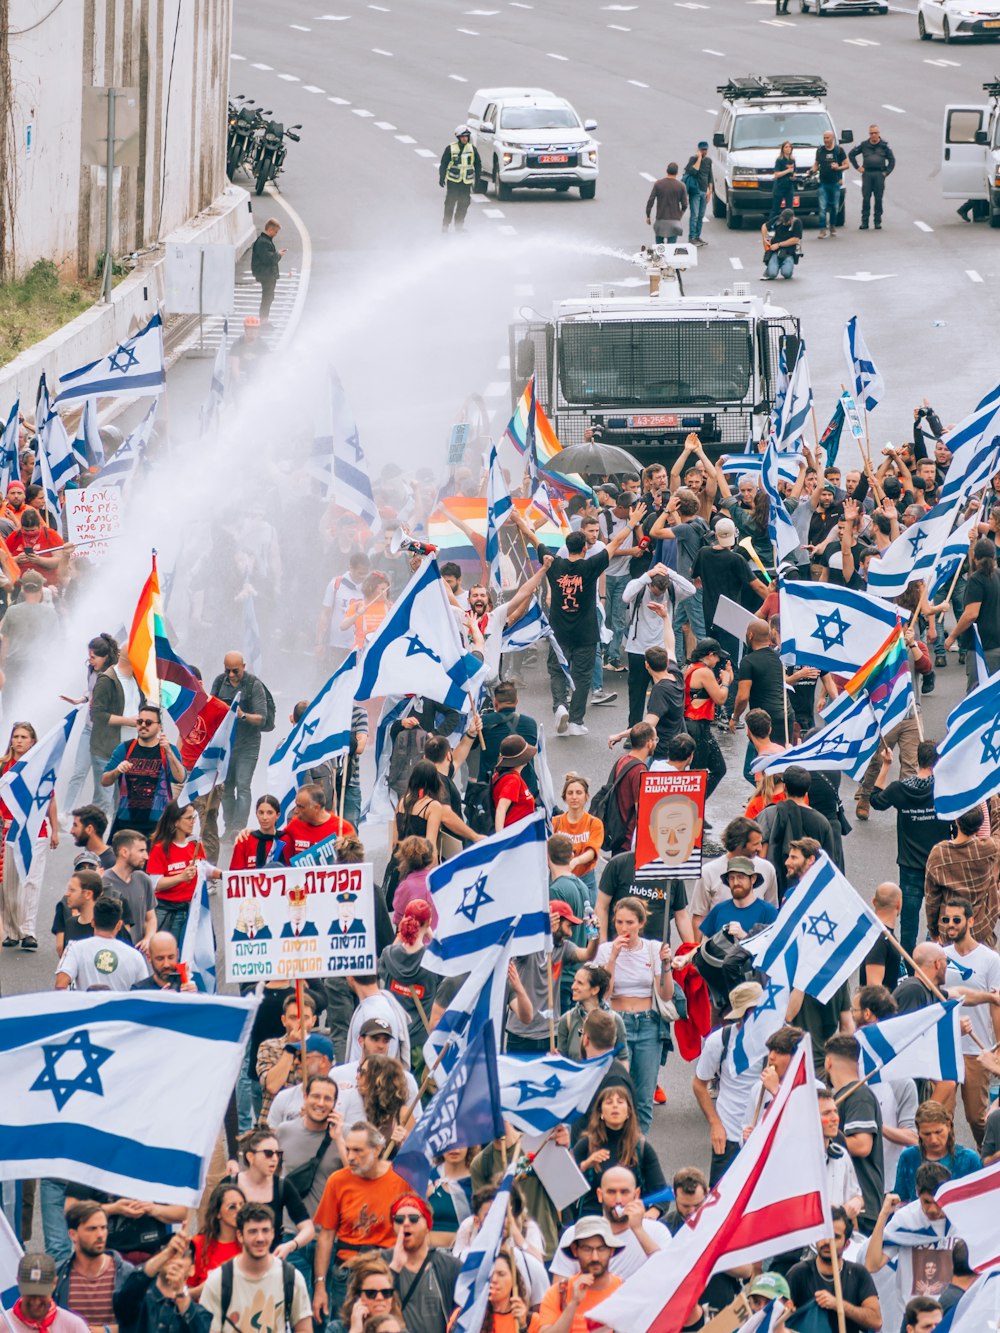 a large group of people holding flags and spraying water